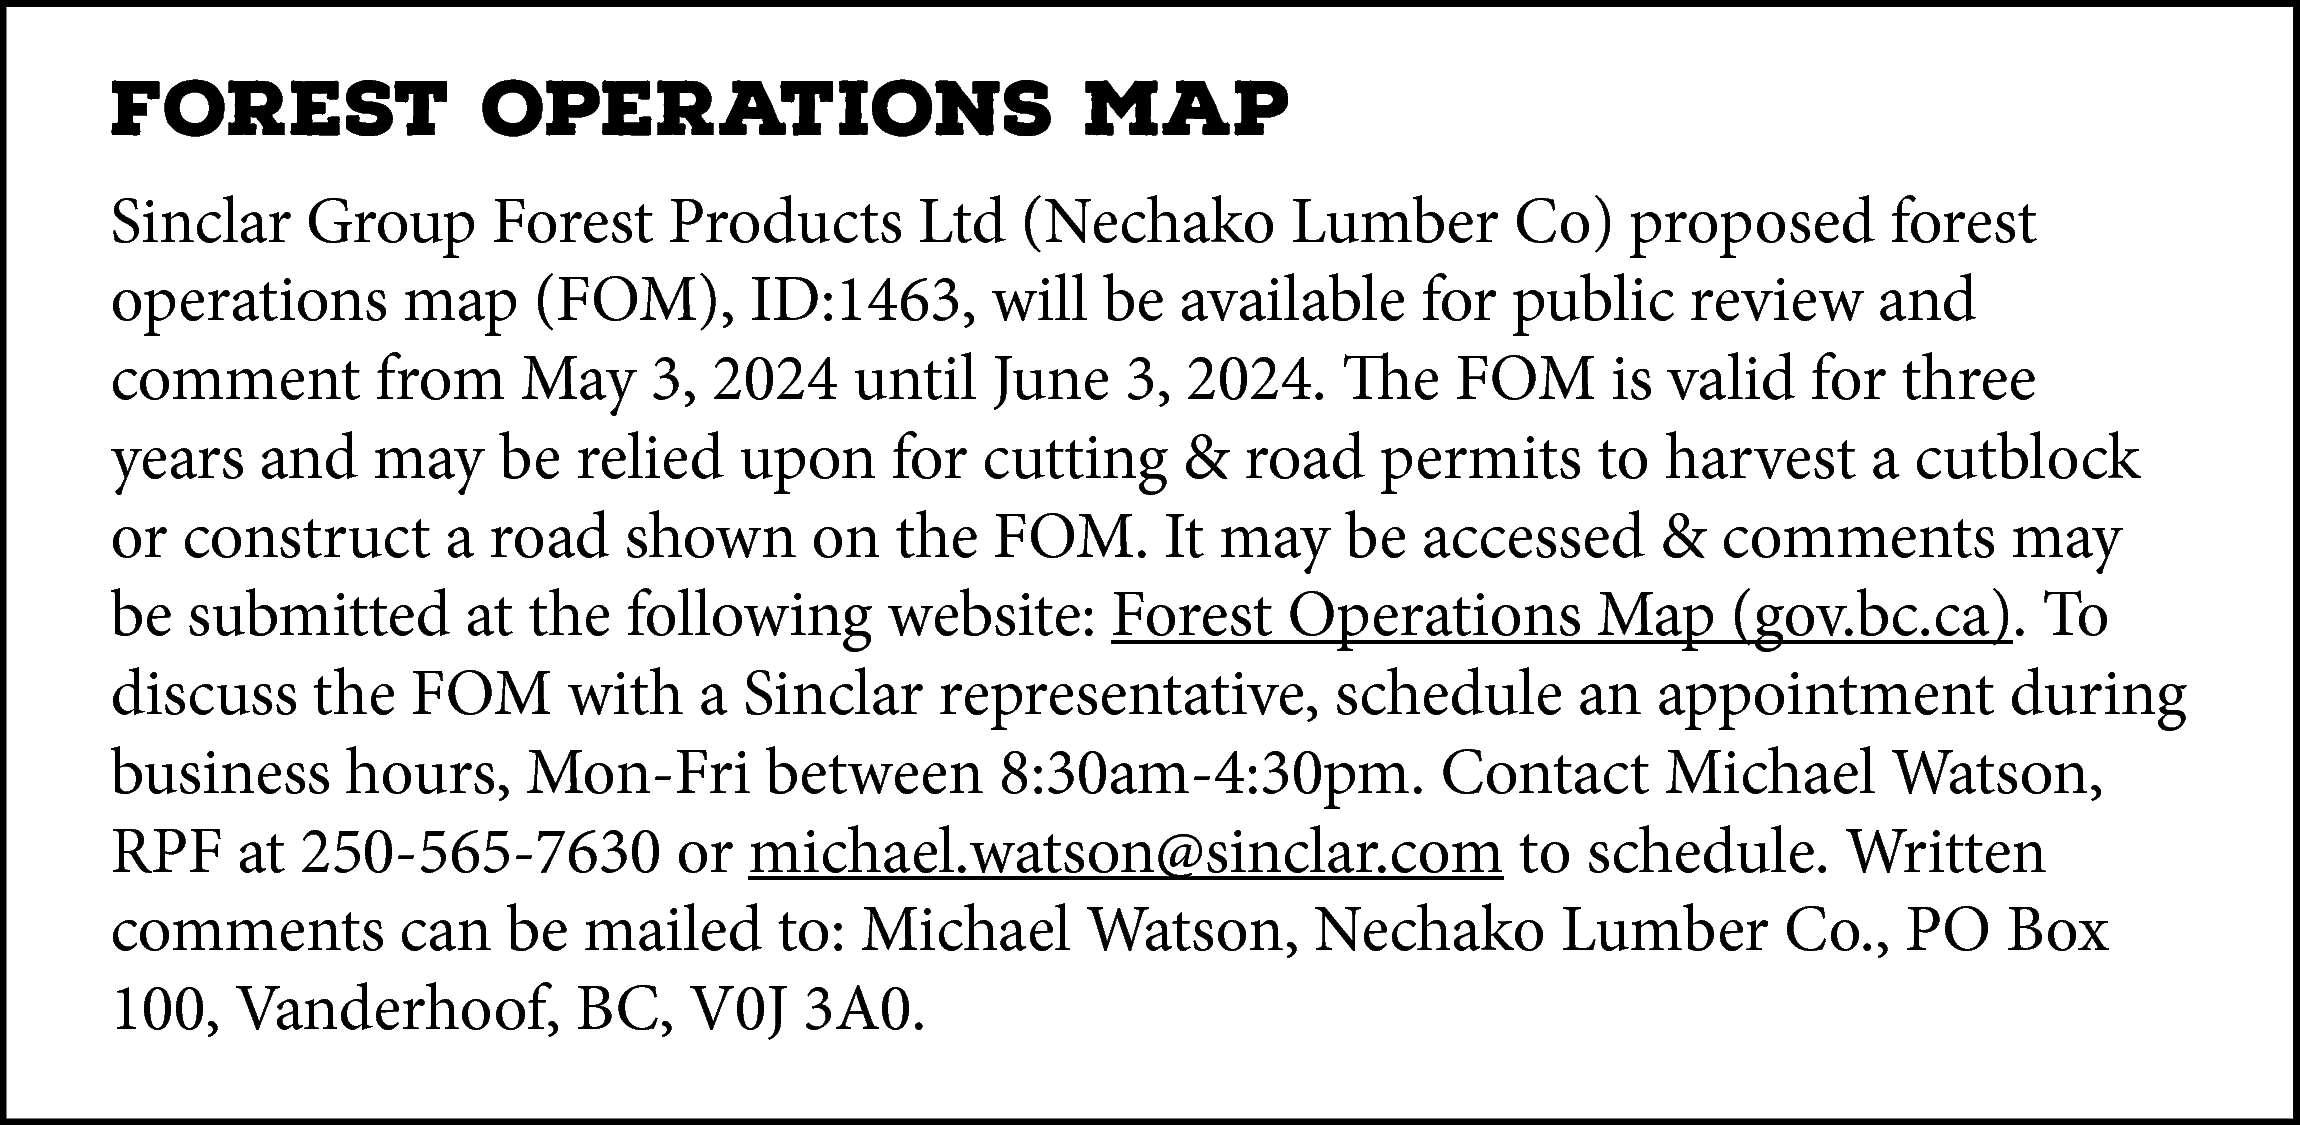 FOREST OPERATIONS MAP <br>Sinclar Group  FOREST OPERATIONS MAP  Sinclar Group Forest Products Ltd (Nechako Lumber Co) proposed forest  operations map (FOM), ID:1463, will be available for public review and  comment from May 3, 2024 until June 3, 2024. The FOM is valid for three  years and may be relied upon for cutting & road permits to harvest a cutblock  or construct a road shown on the FOM. It may be accessed & comments may  be submitted at the following website: Forest Operations Map (gov.bc.ca). To  discuss the FOM with a Sinclar representative, schedule an appointment during  business hours, Mon-Fri between 8:30am-4:30pm. Contact Michael Watson,  RPF at 250-565-7630 or michael.watson@sinclar.com to schedule. Written  comments can be mailed to: Michael Watson, Nechako Lumber Co., PO Box  100, Vanderhoof, BC, V0J 3A0.    